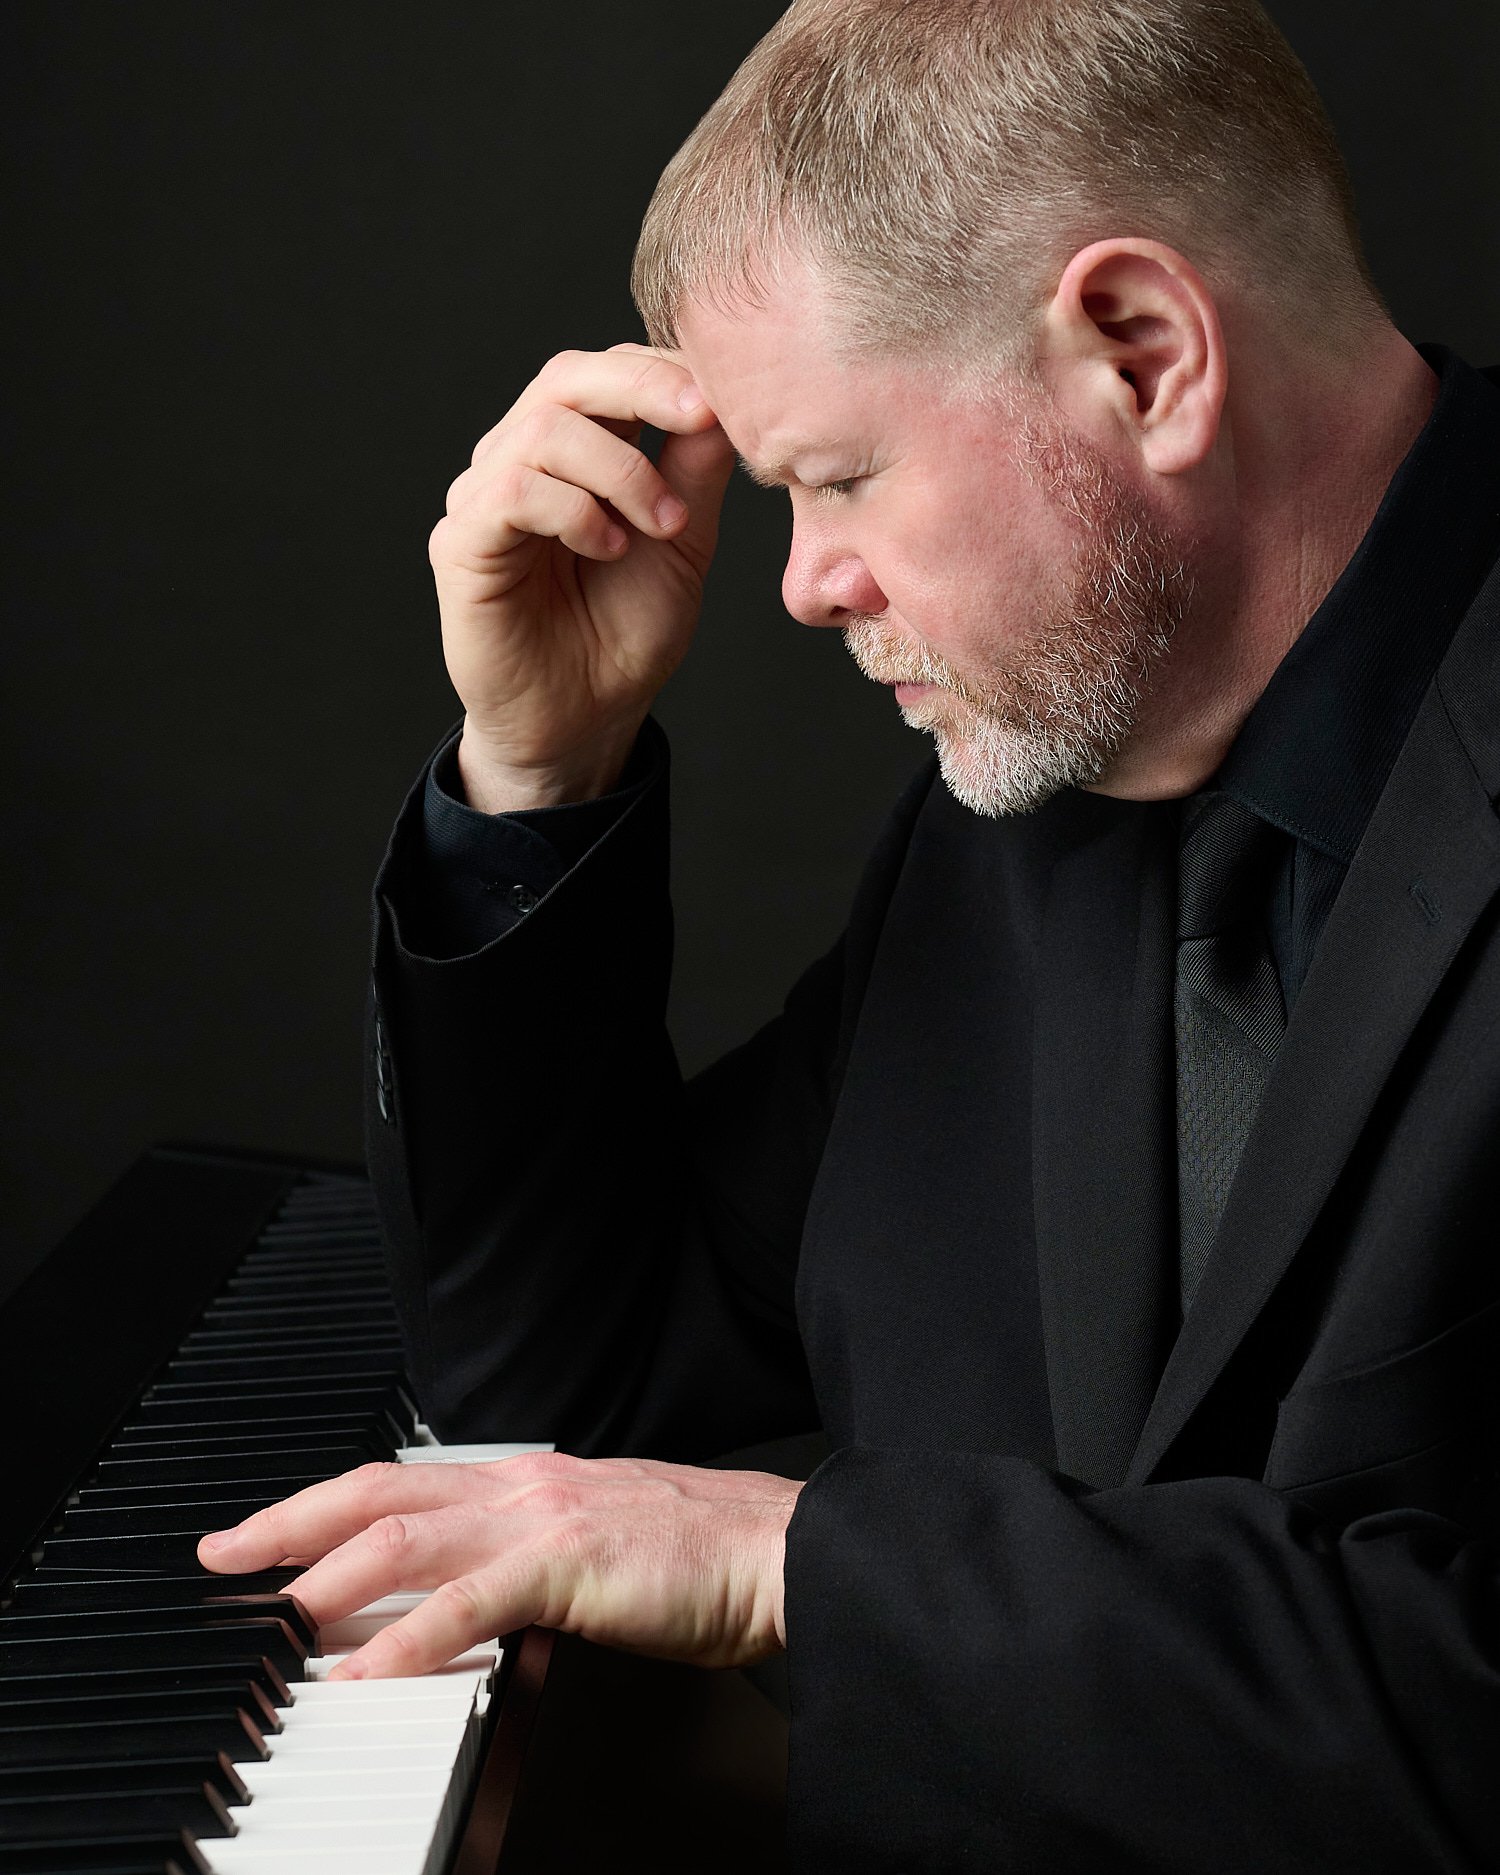  Tim Heavner is posing for his business headshots in a professional photography studio with a dark black background. Timothy is a pianist and is portrayed with his keyboard full length and close-up. 